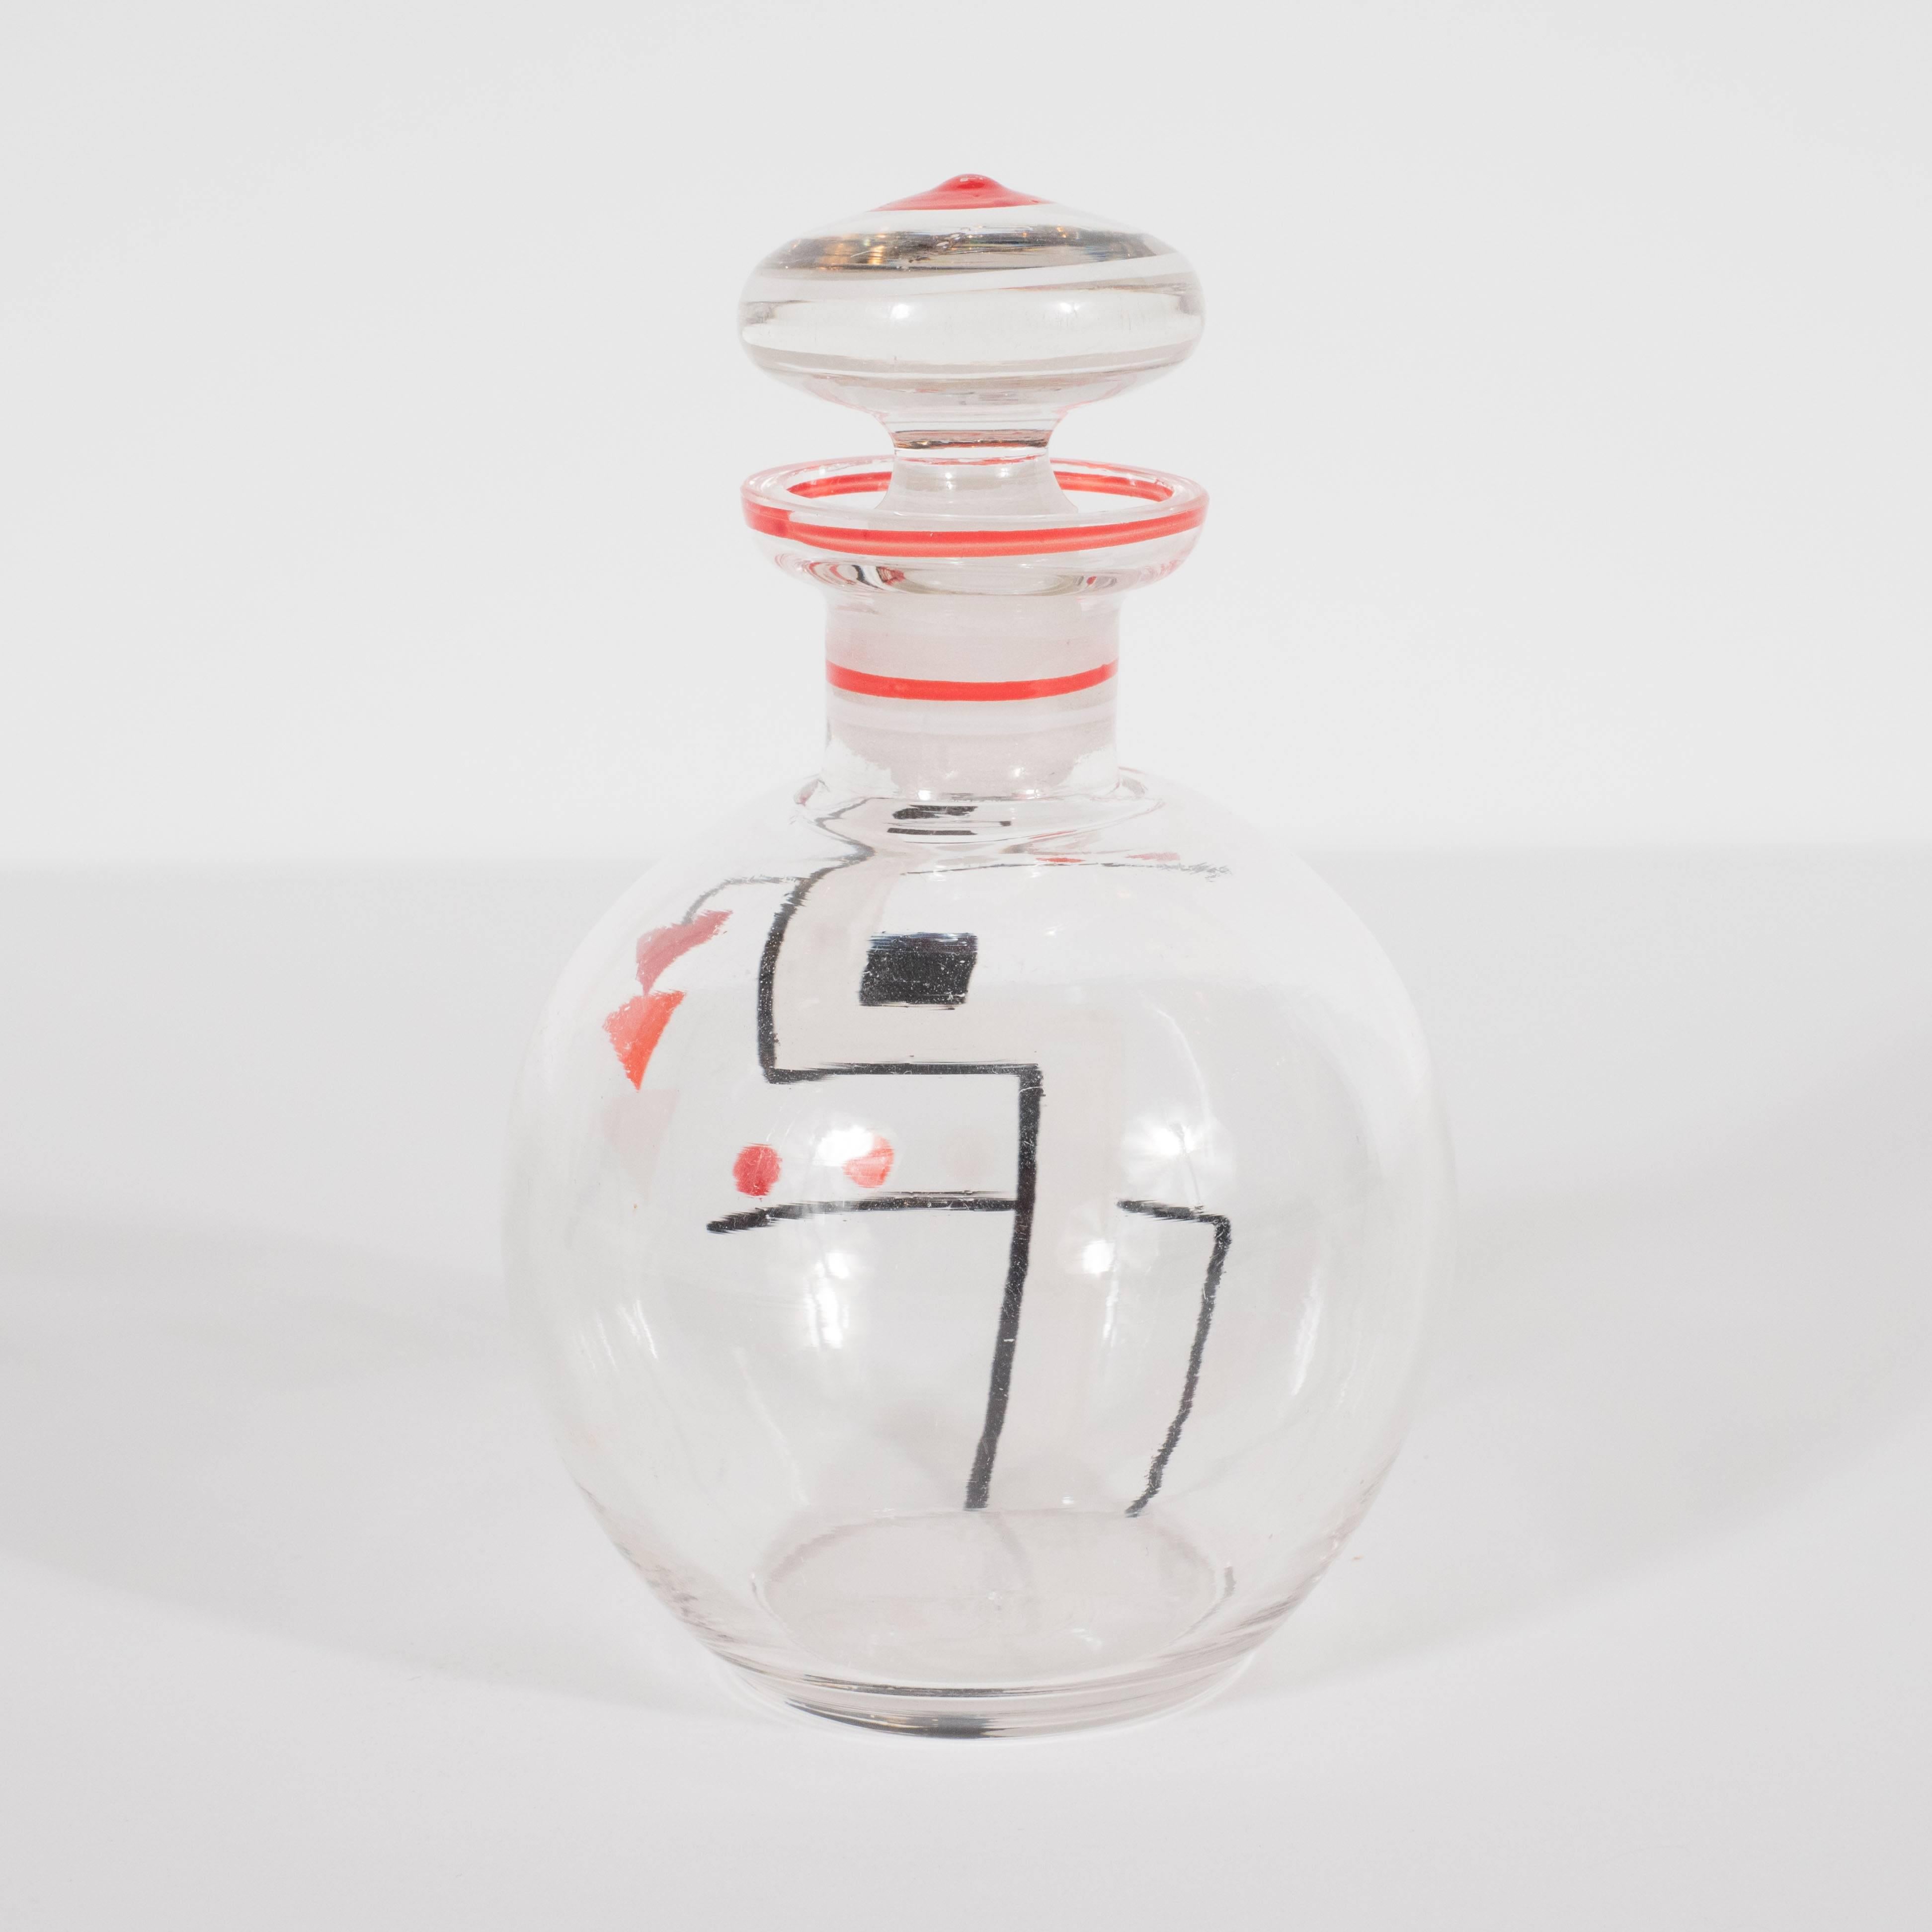 This sophisticated perfume bottle was realized, circa 1930, in the Czech Republic- a country renowned for its superlative glass products during this time period. This piece was fastidiously hand-painted with geometric forms, reflecting the influence